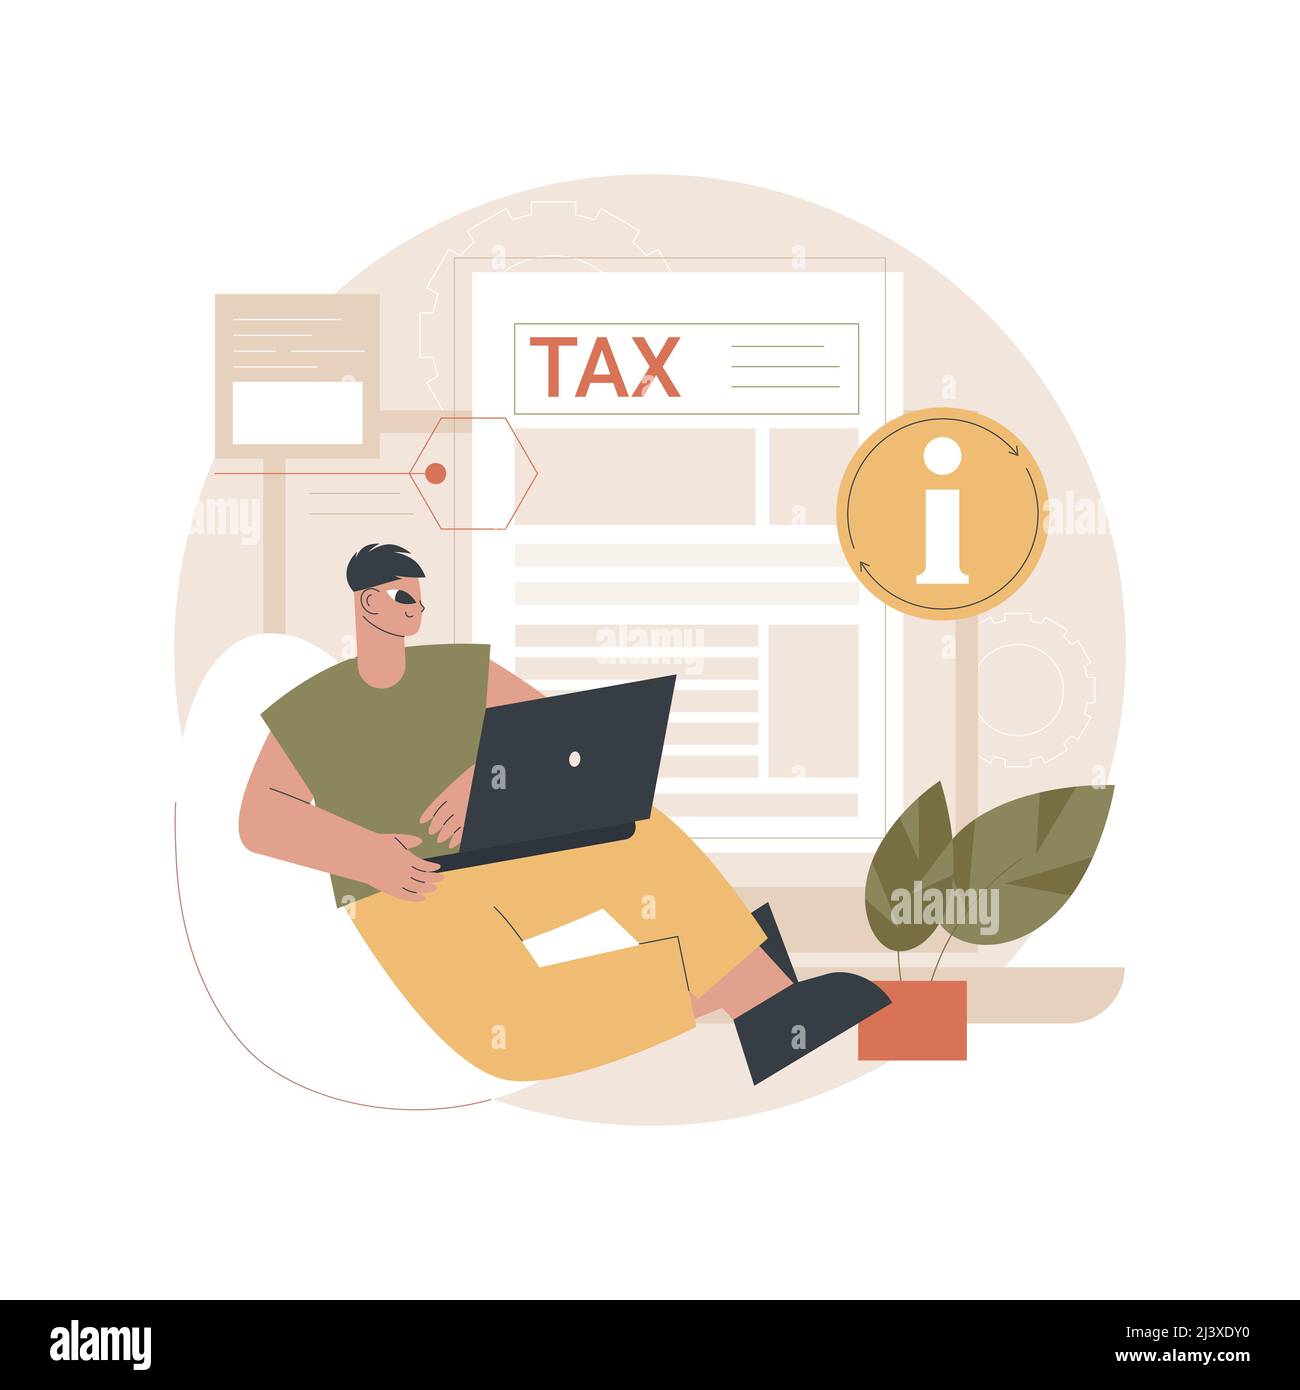 Provide and update your personal information abstract concept vector illustration. Tax filing, gather paperwork, employer form, earnings statement doc Stock Vector